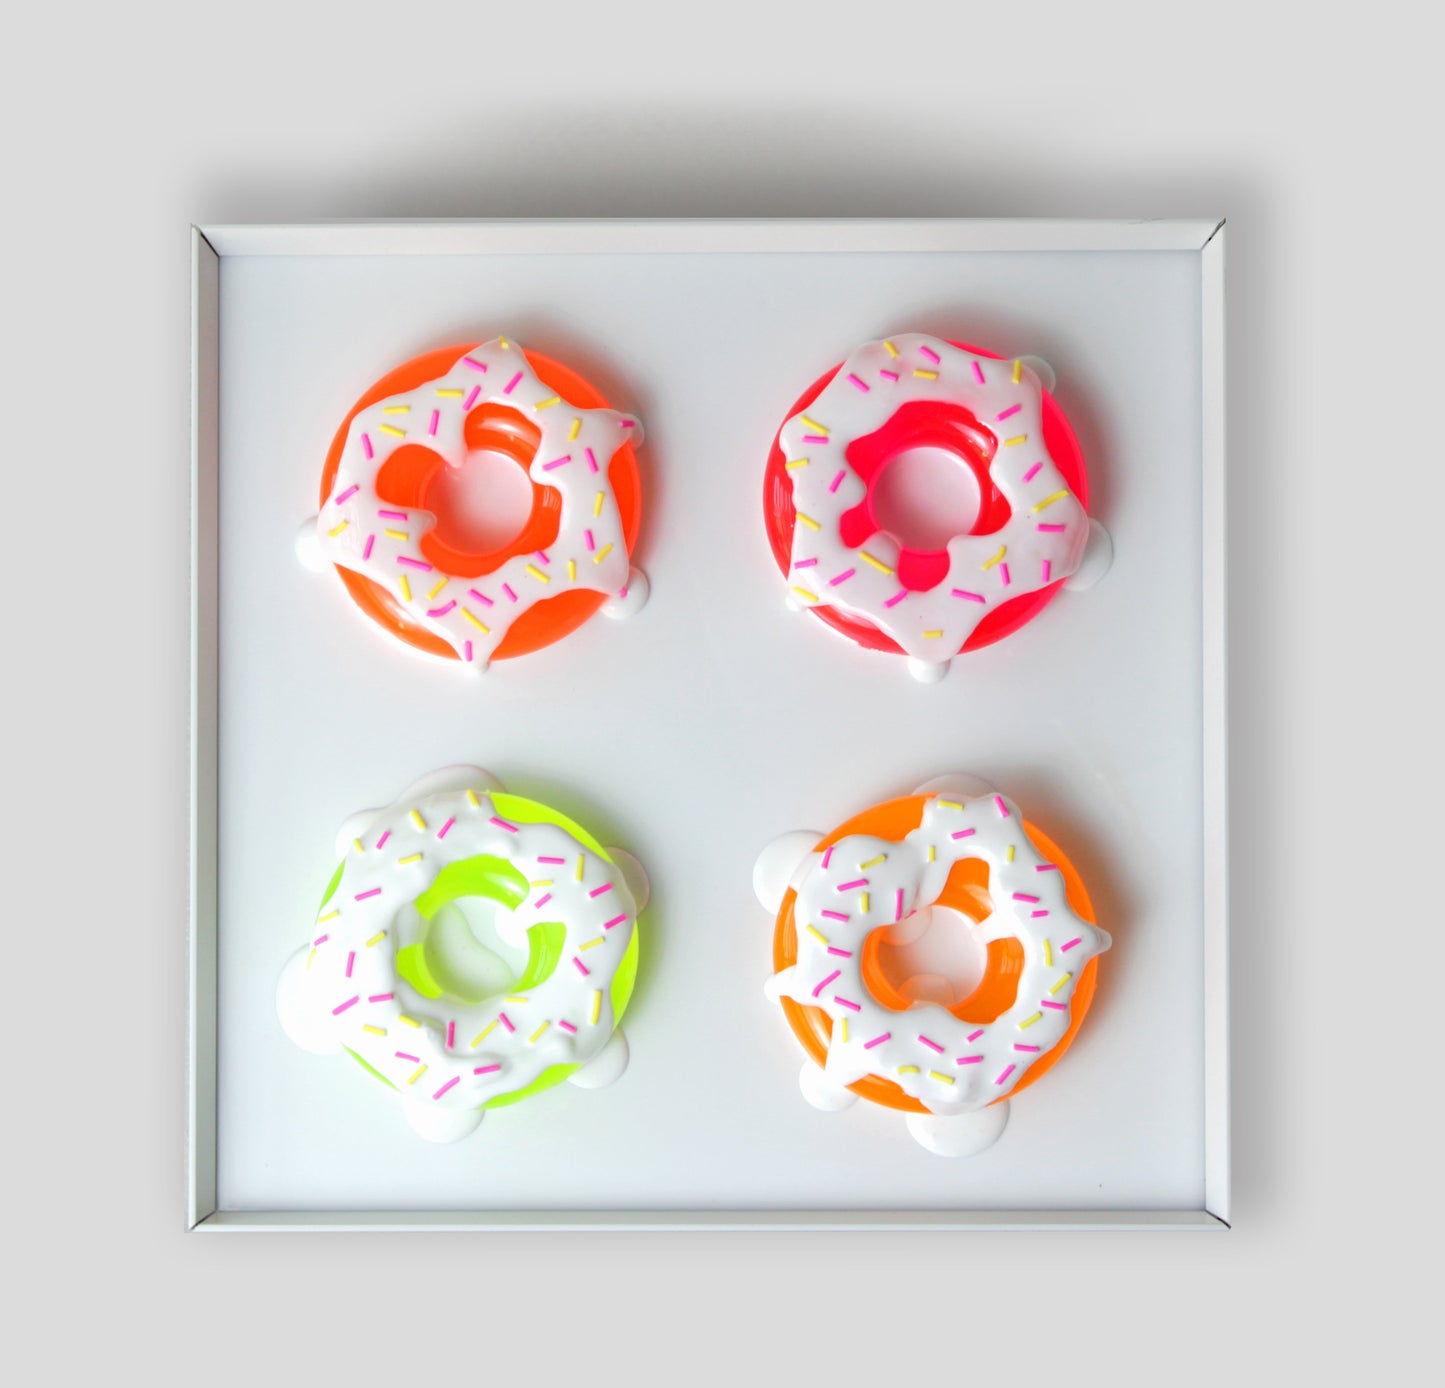 Neon Color Donuts Wall Hanging Pop Art